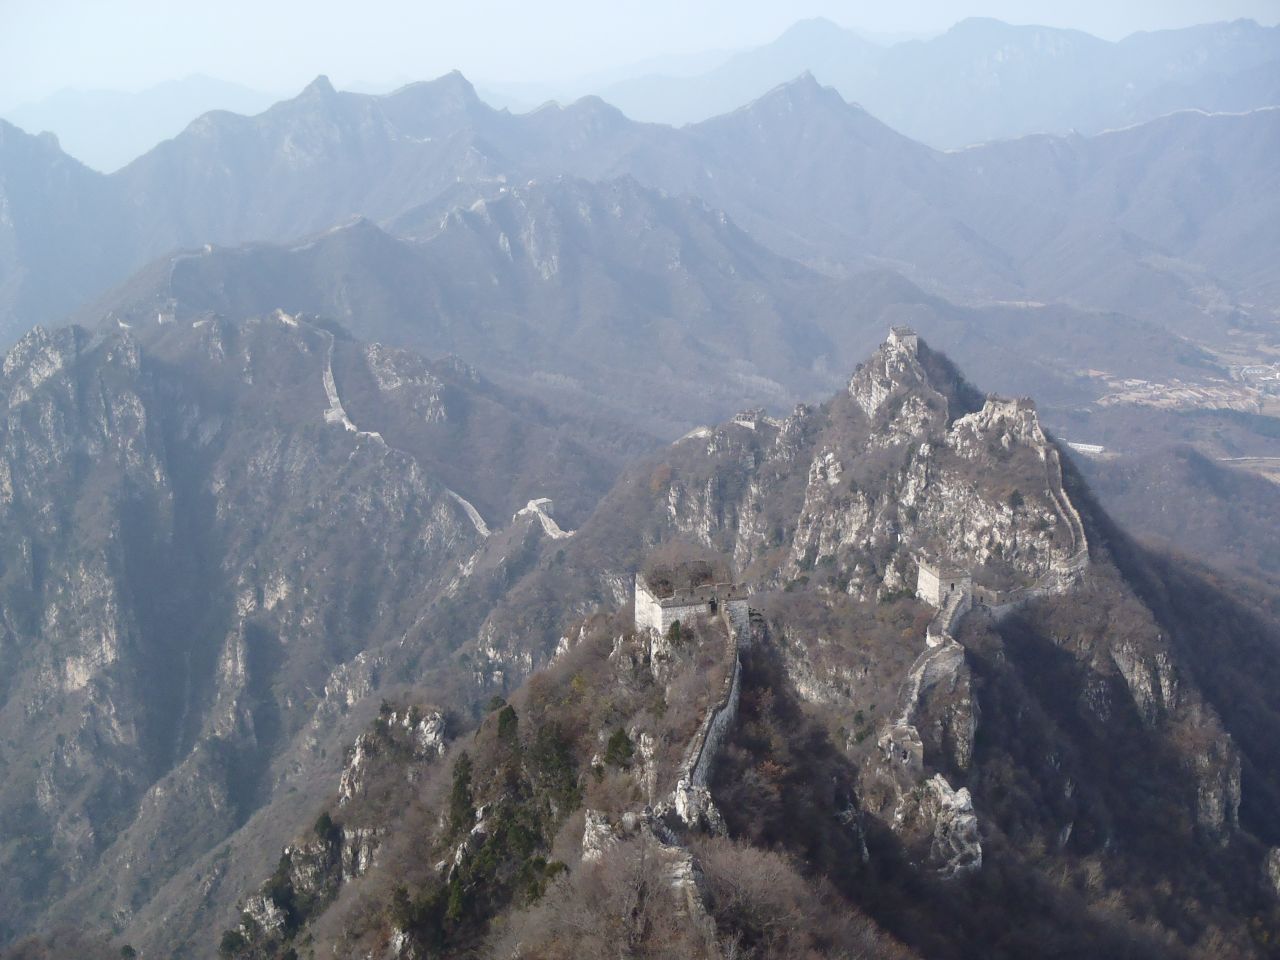 For hiking and photography enthusiasts, there is no better place on the Great Wall of China than the dramatic and difficult Jiankou section, says CNN cameraman Brad Olson.  Located about 90 km from Beijing, the Ming Dynasty relic is best entered from the north through the village of Xizhazi in Beijing's Huairou District.  As the section is about 9 miles (18 km) long with rugged terrain, Olsen covered it over four visits, once during each season.  